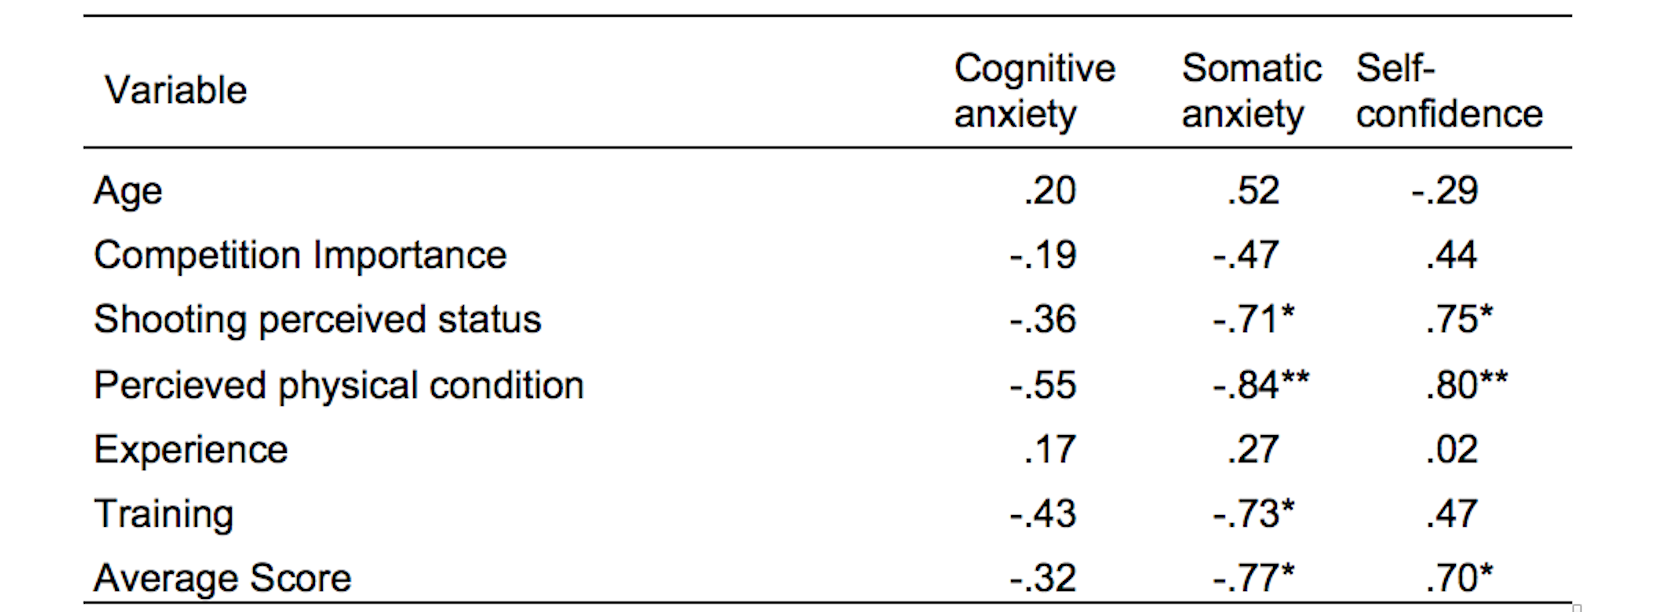 Correlations between anxiety, self-confidence and the rest of the variables during the finals